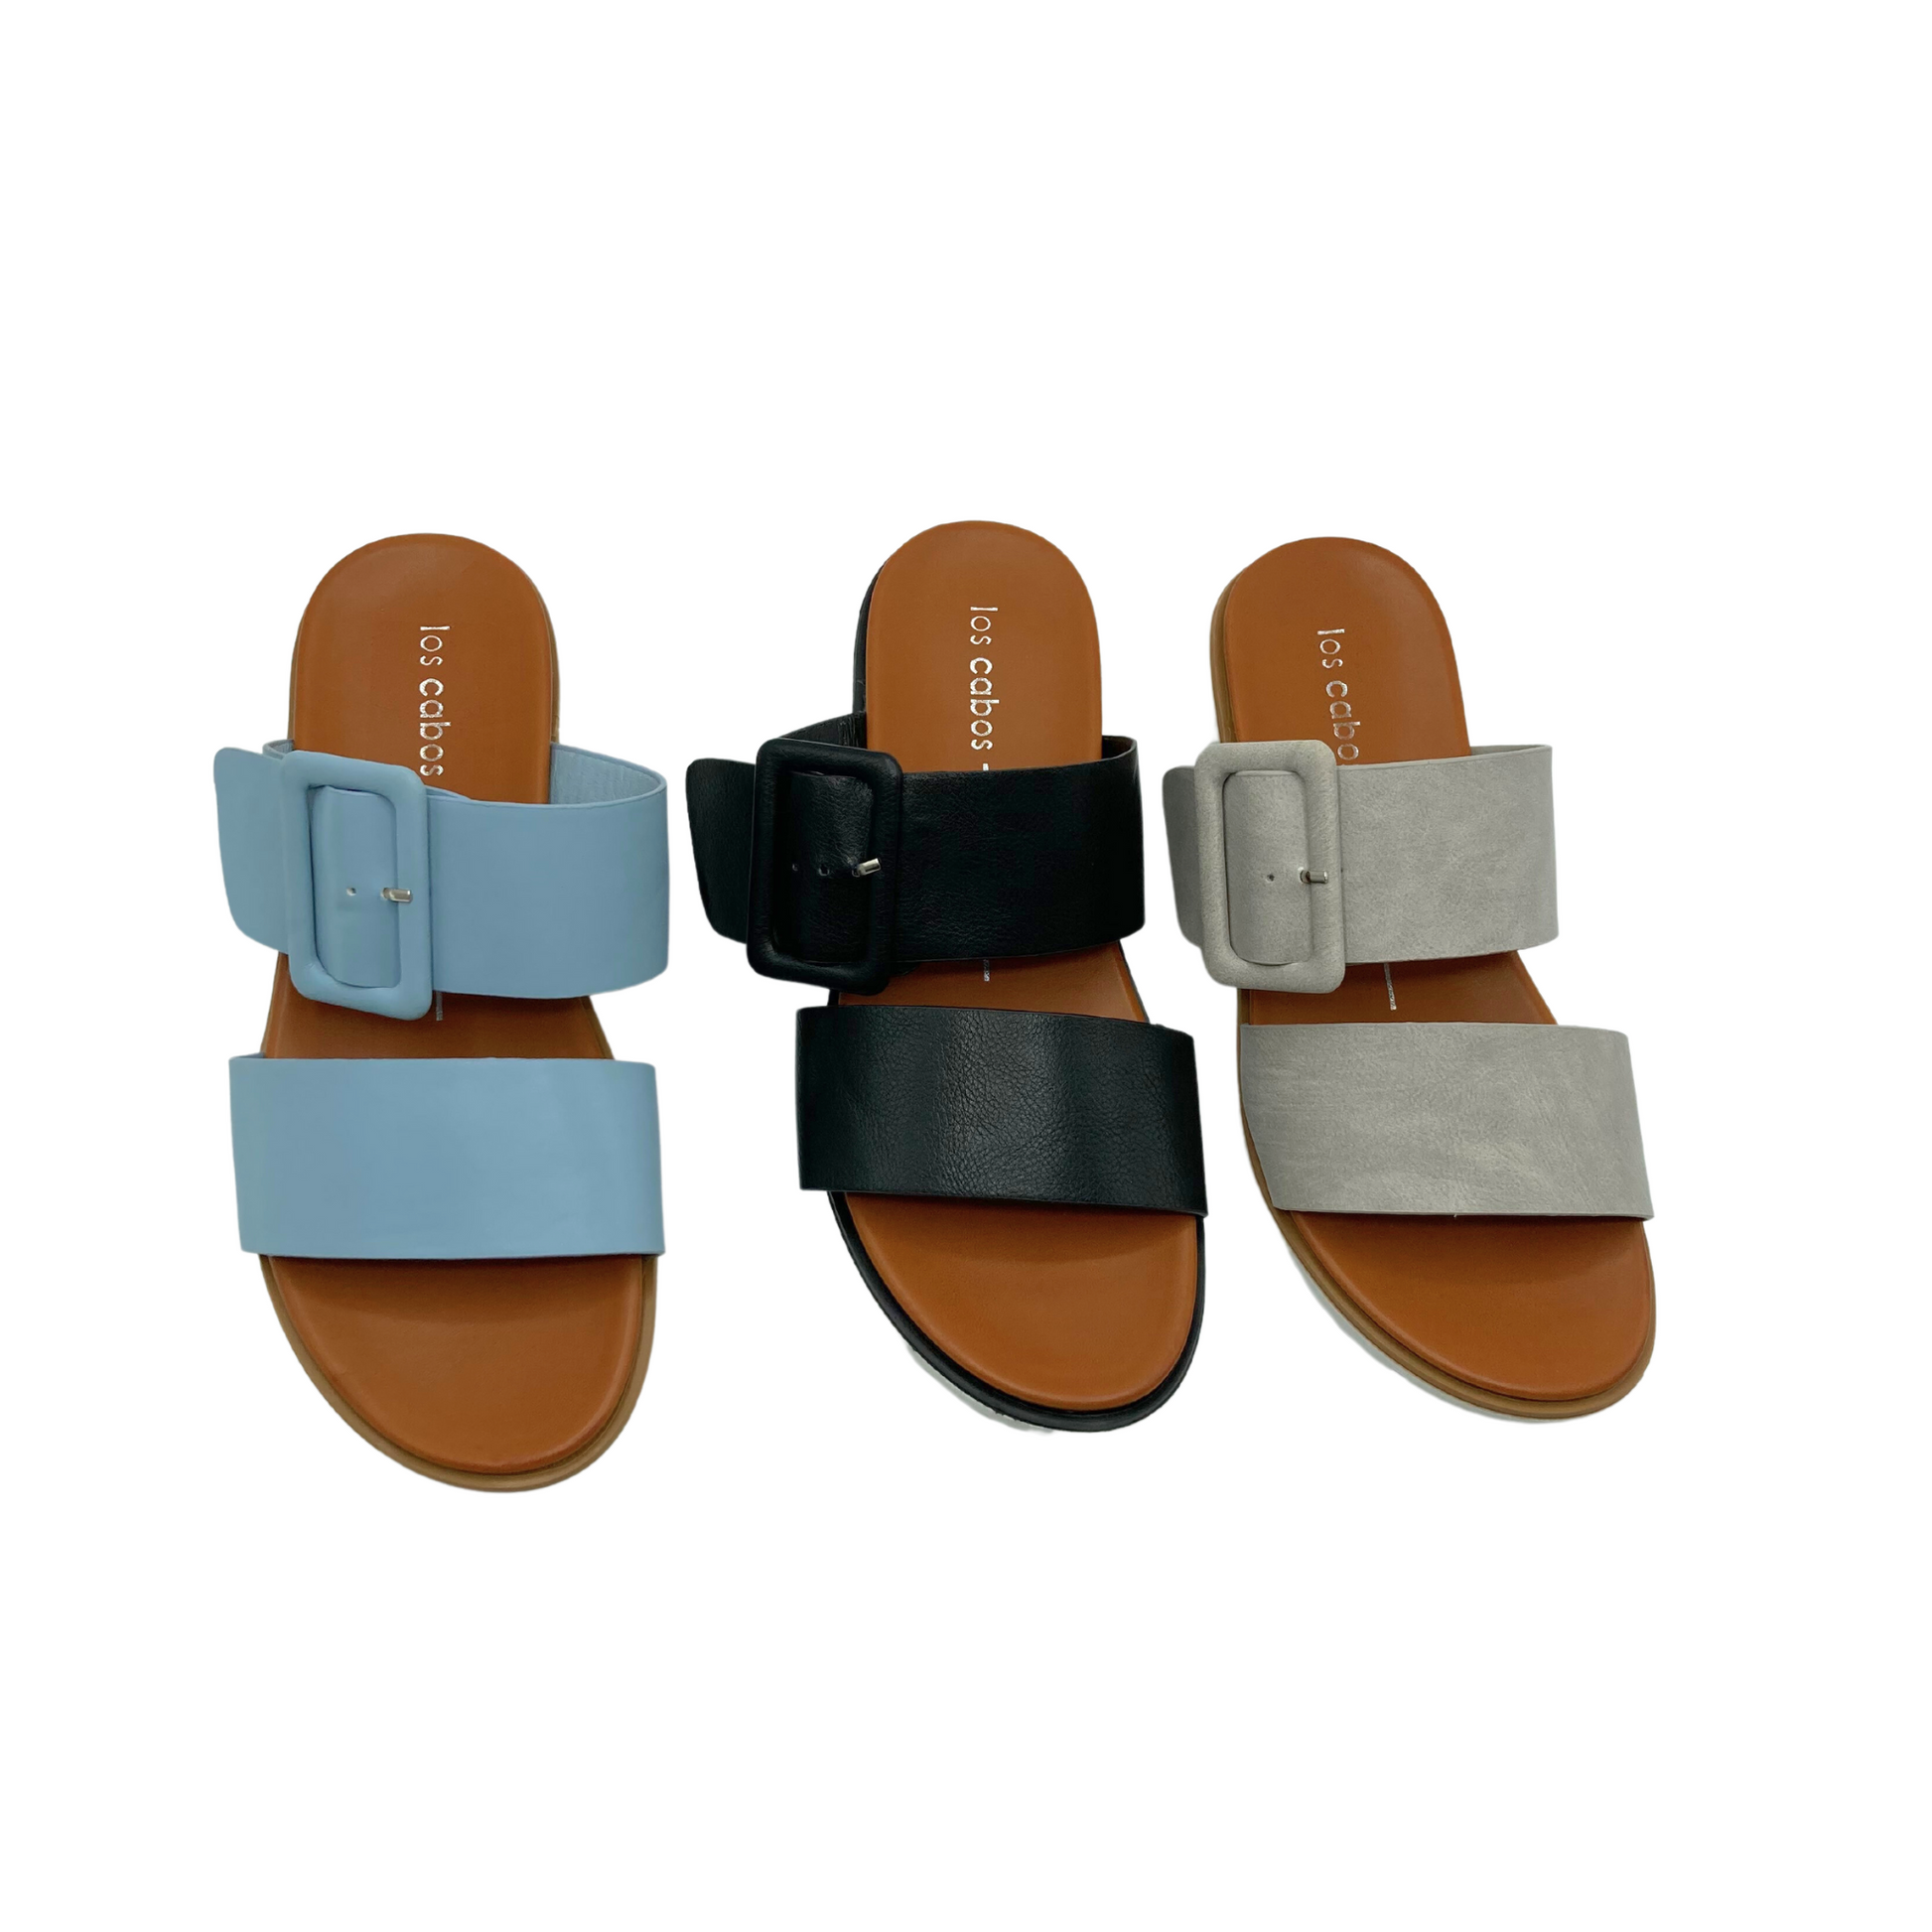 Top down view of a summer slide in 3 colors - baby blue, black, and taupe